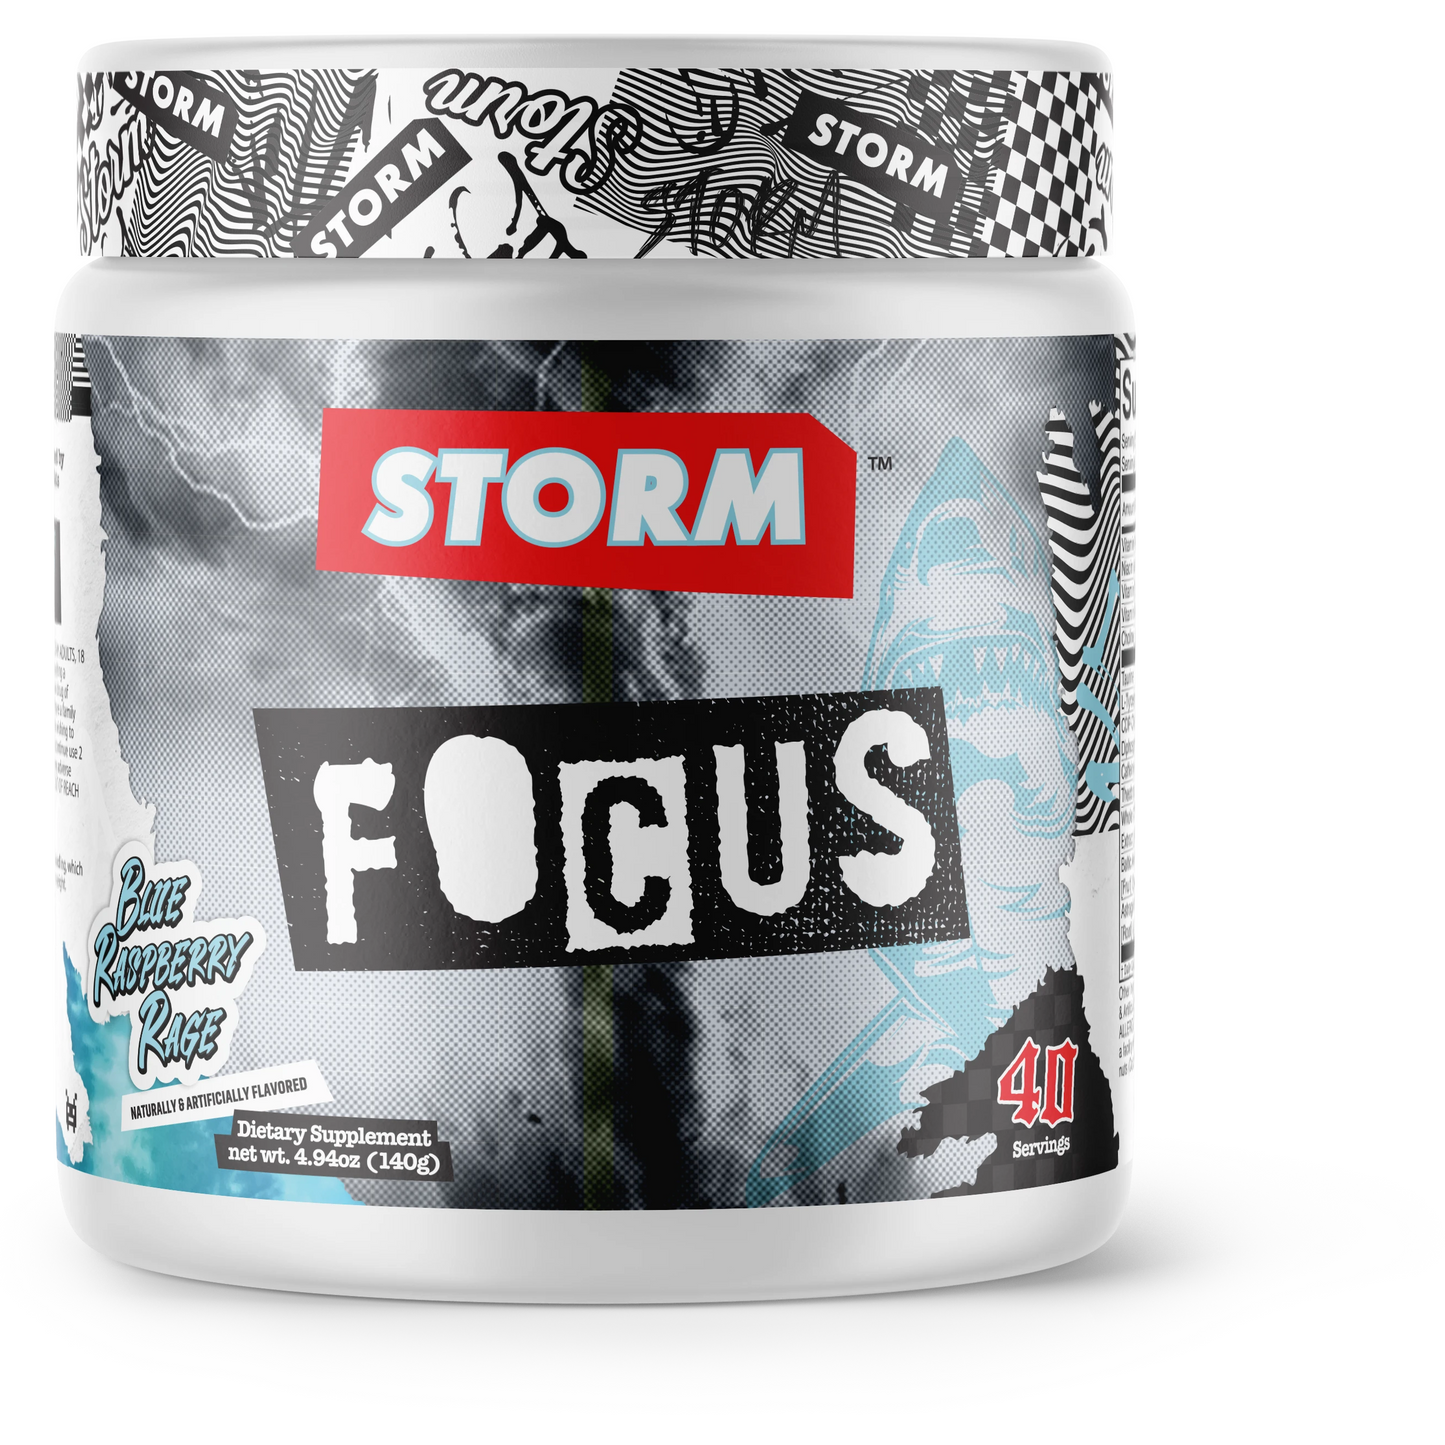 Storm Focus | Buy 1 Get 1 Free Max Muscle Orlando